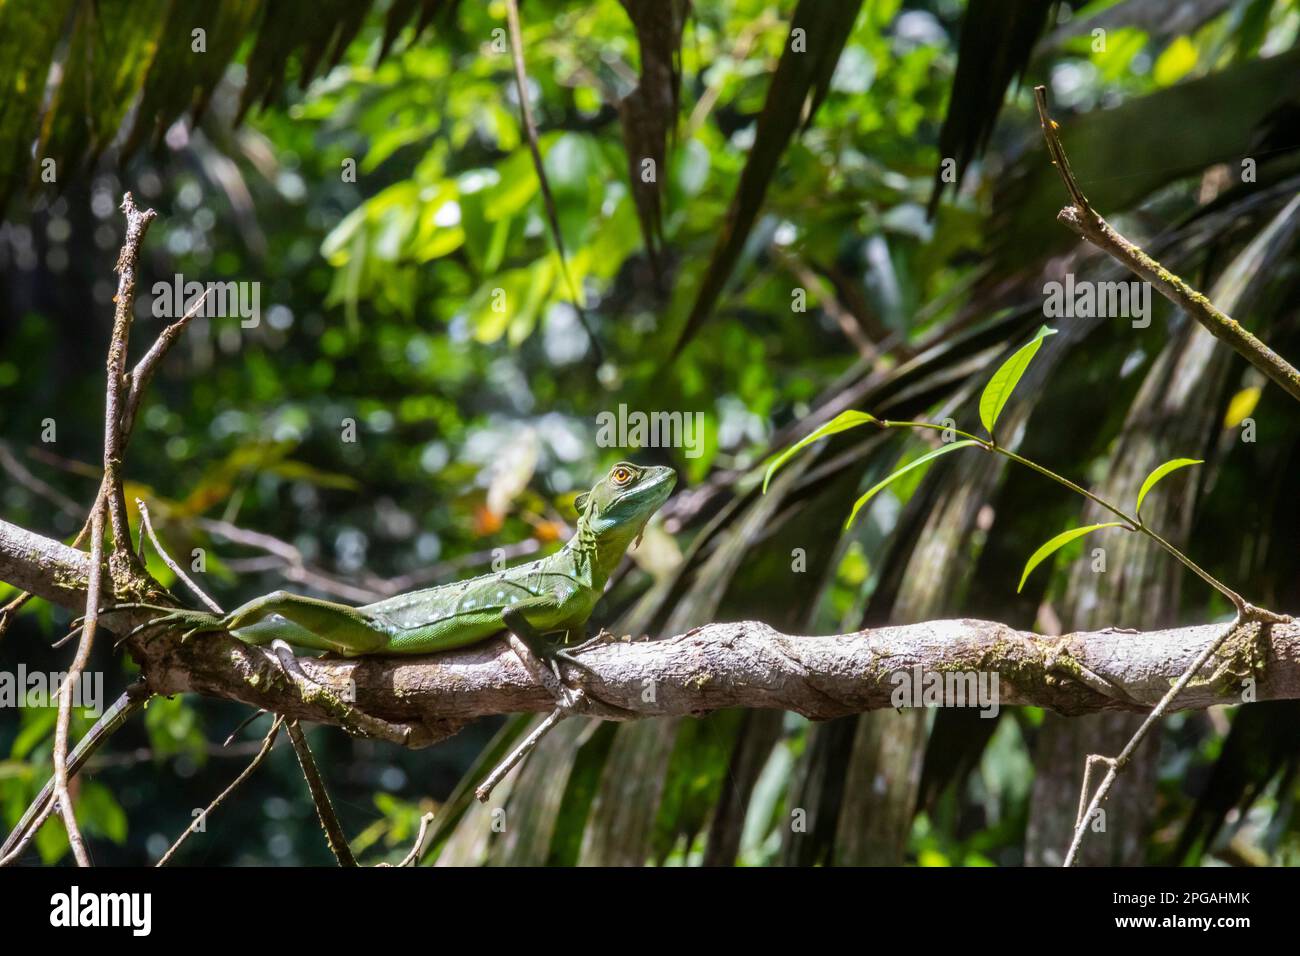 Tortuguero National Park, Costa Rica - A female Emerald basilisk (Basiliscus plumifrons). It is commonly called the Jesus Christ Lizard because young Stock Photo